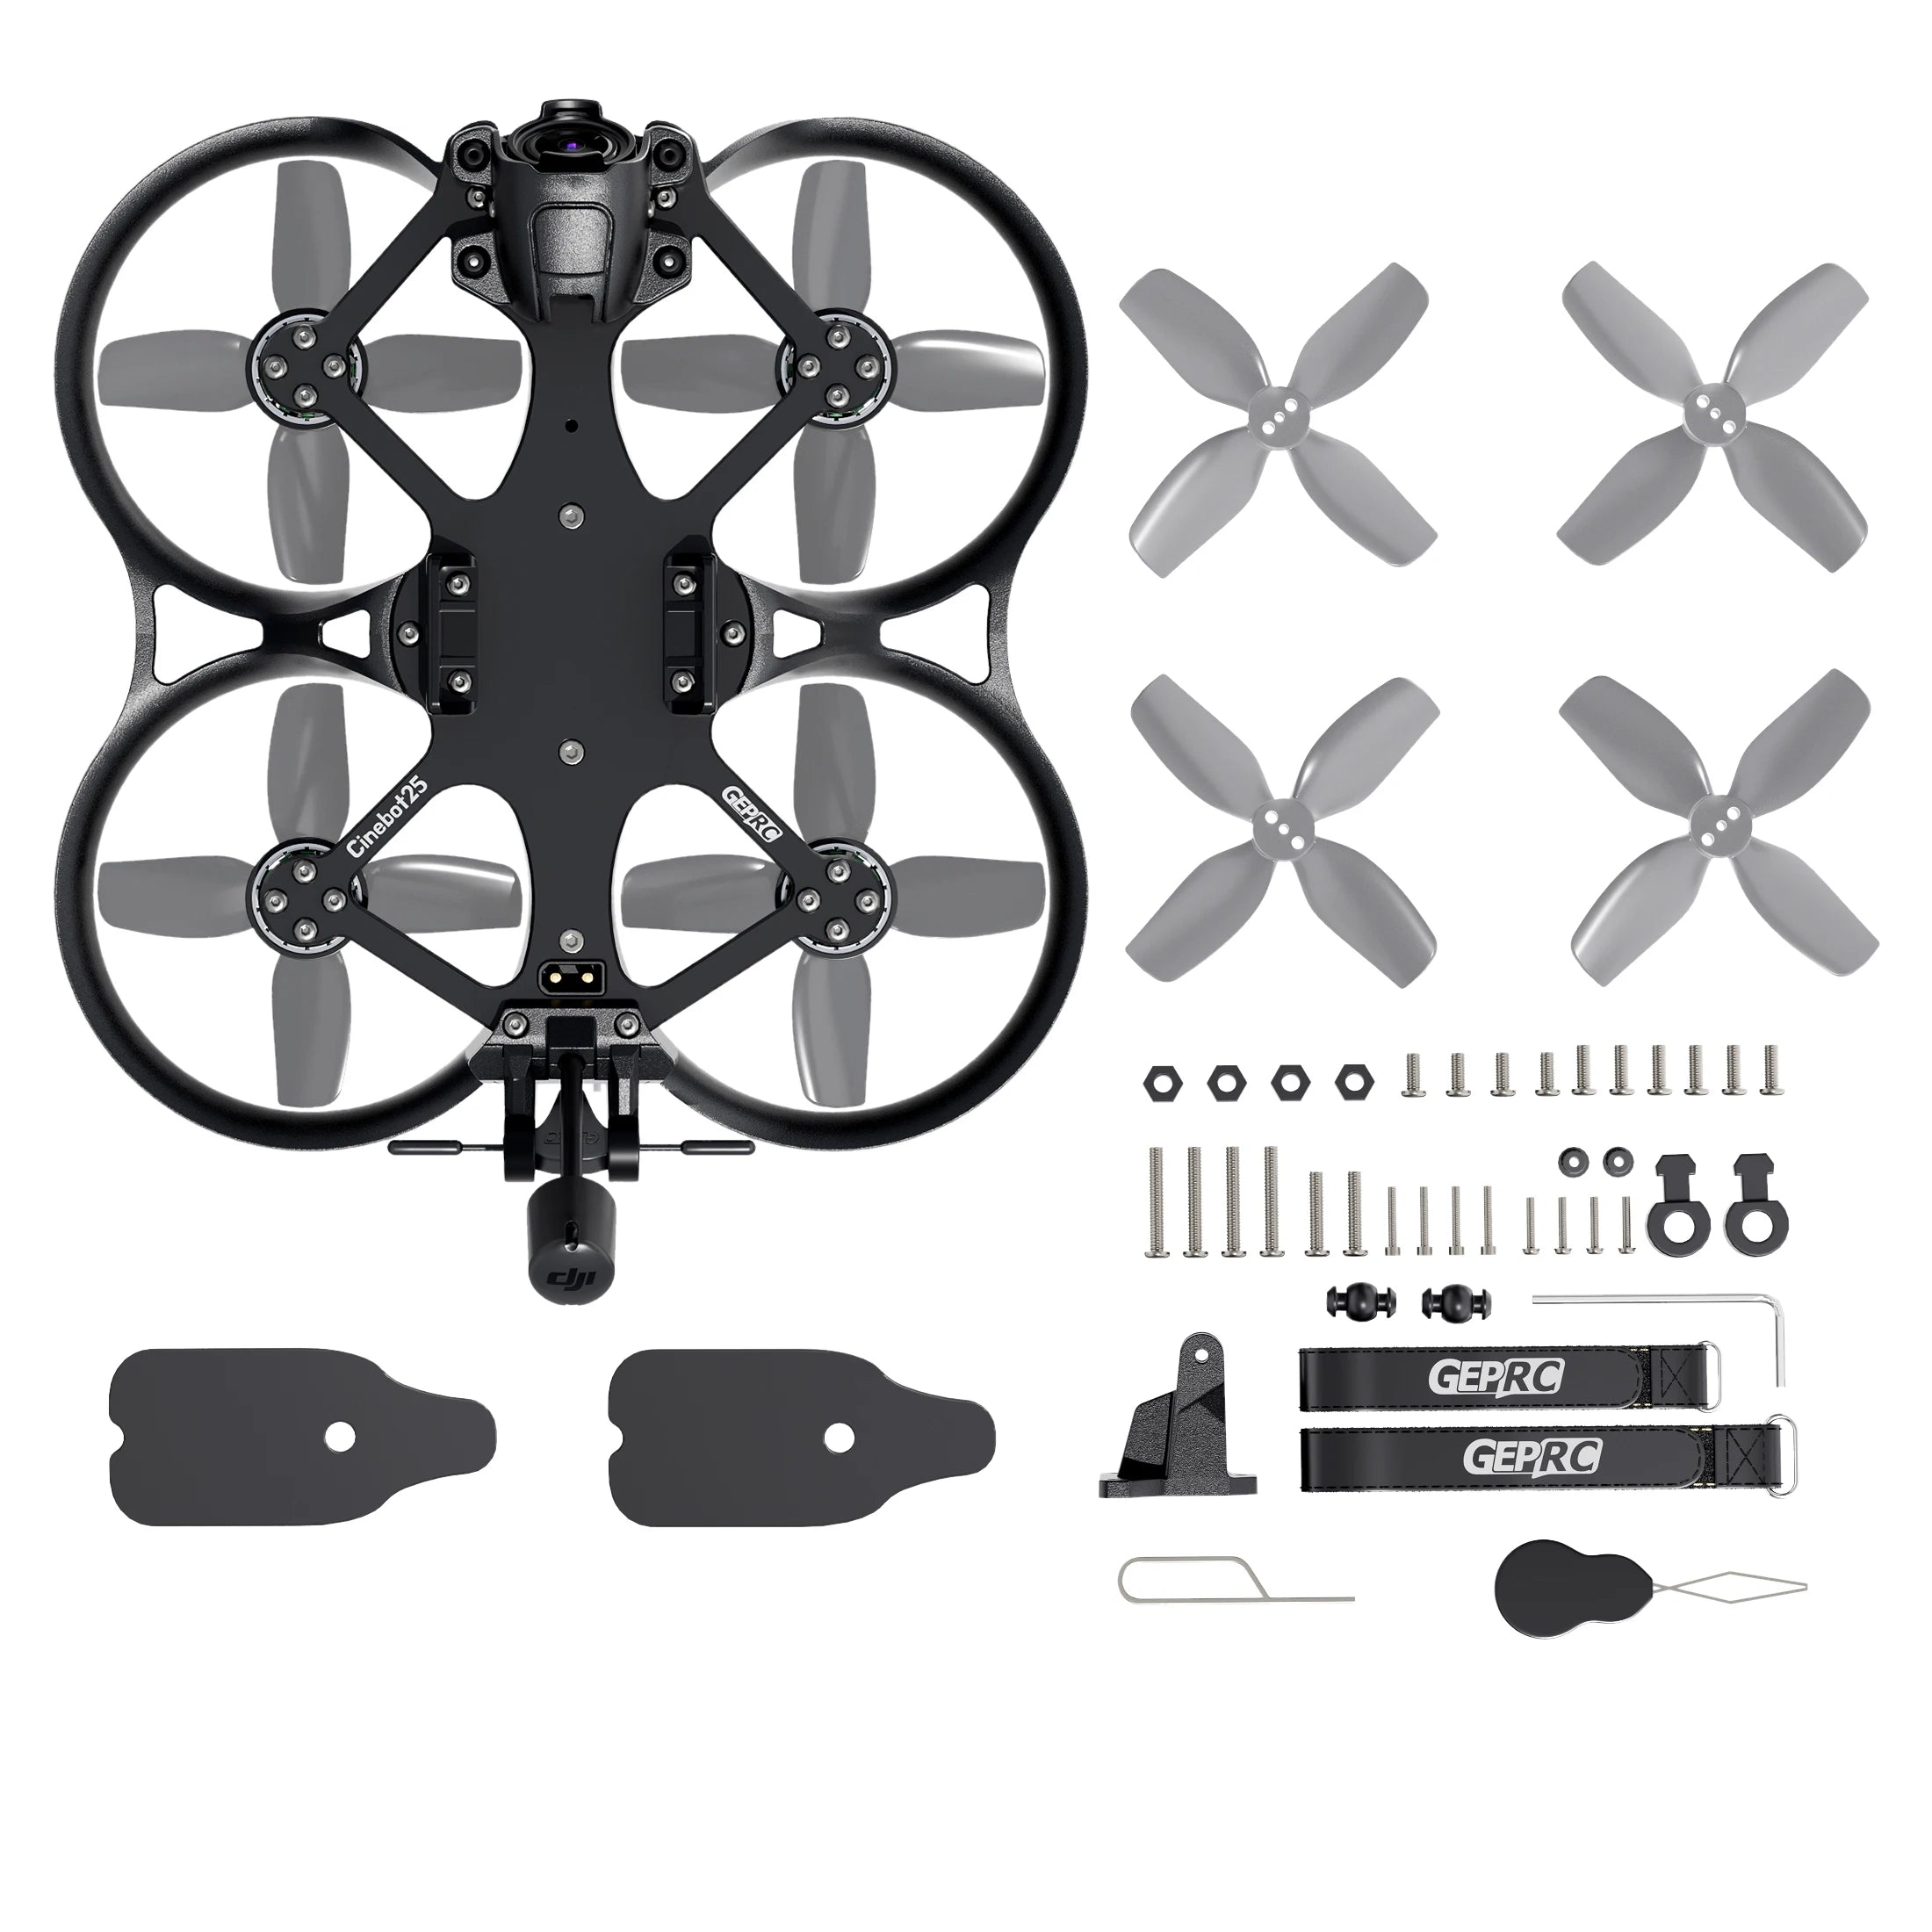 GEPRC Cinebot25 S HD O3  2.5inch FPV, if the payment amount is greater than 150 euros, AiExpress will not charge any